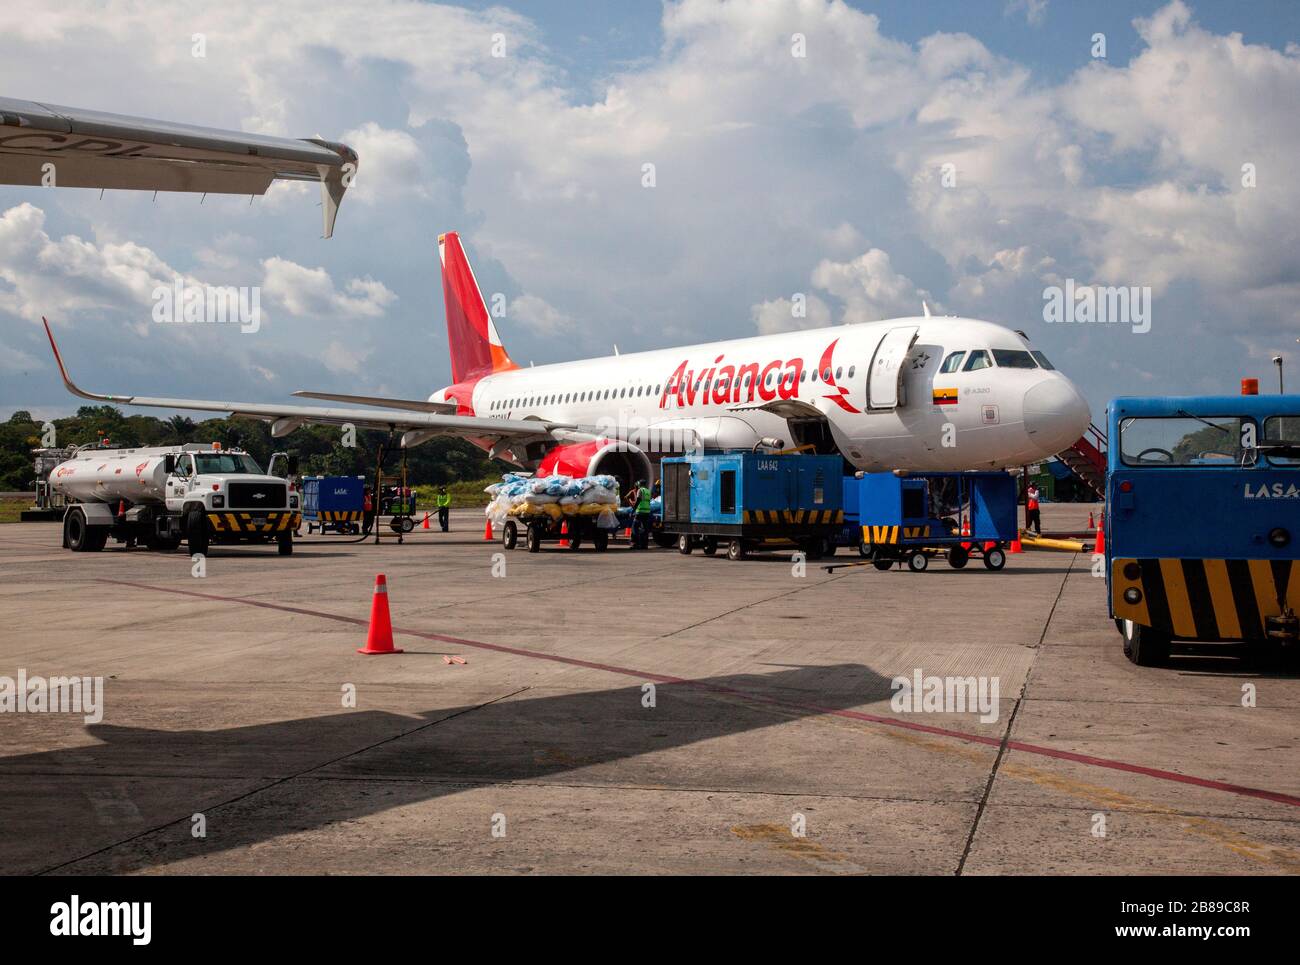 Avianca Airbus plane, Colombia national airline, at Leticia airport, Amazon, Colombia, South America. Stock Photo